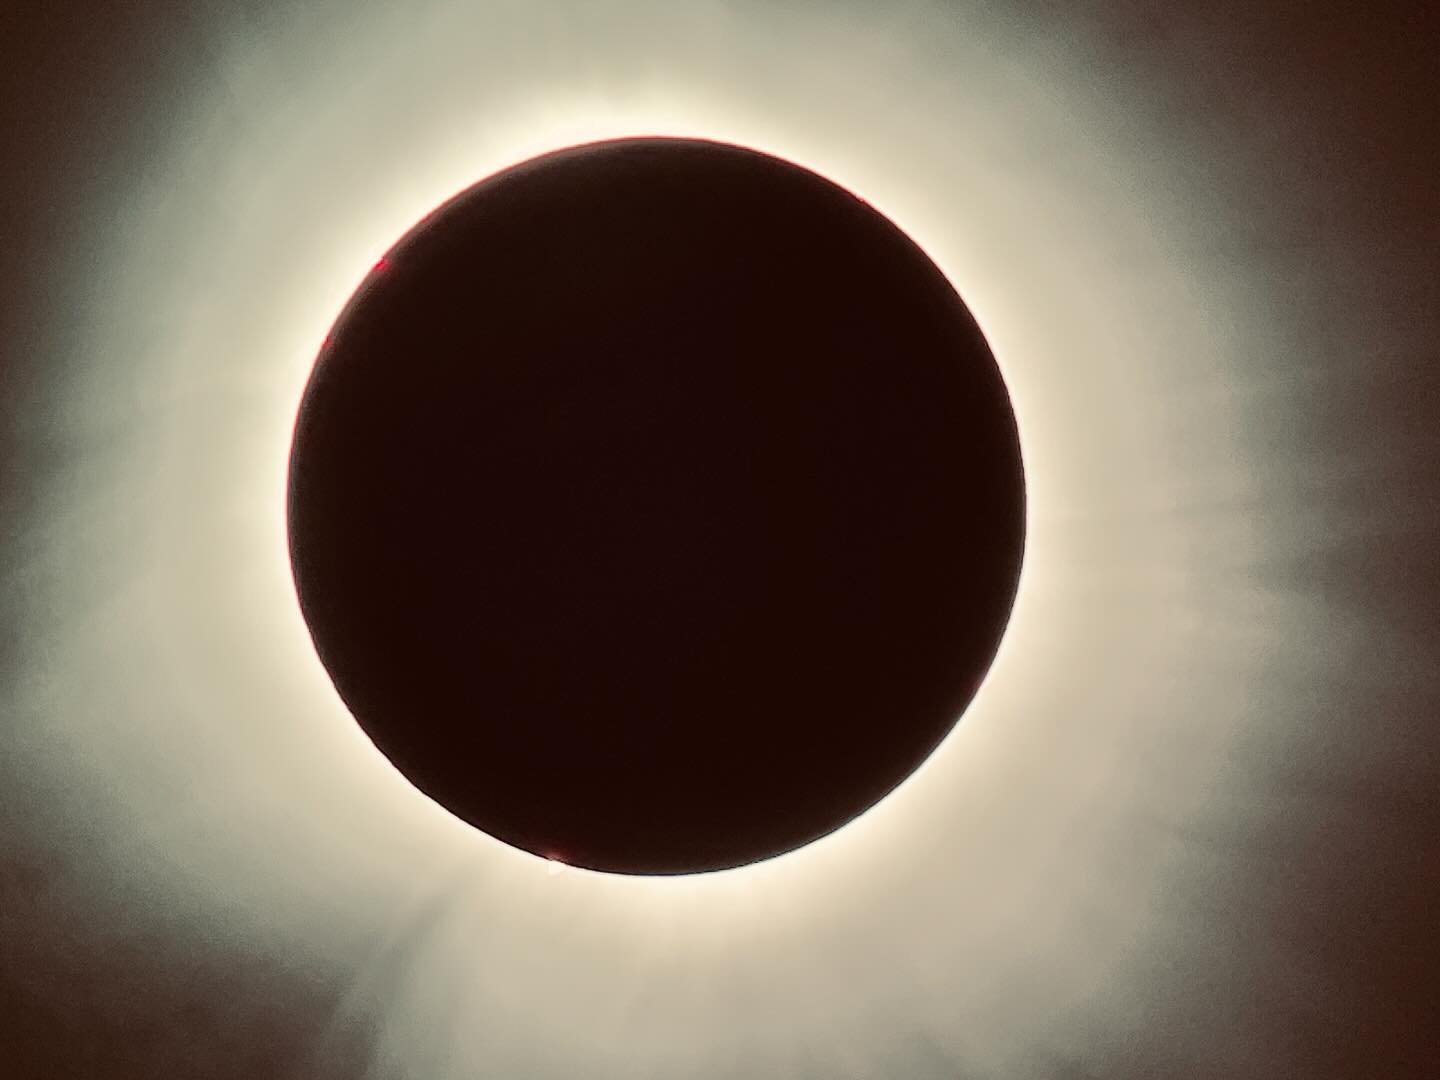 Spent time with old friends. Made a slew of new friends. Got to absorb some #BigWriterEnergy. Wore a sundress. Enjoyed some spring #birding. And saw one hell@of a celestial event. I am thankful. #Phoneskope #swarovskioptik #dgiscoping #eclipse